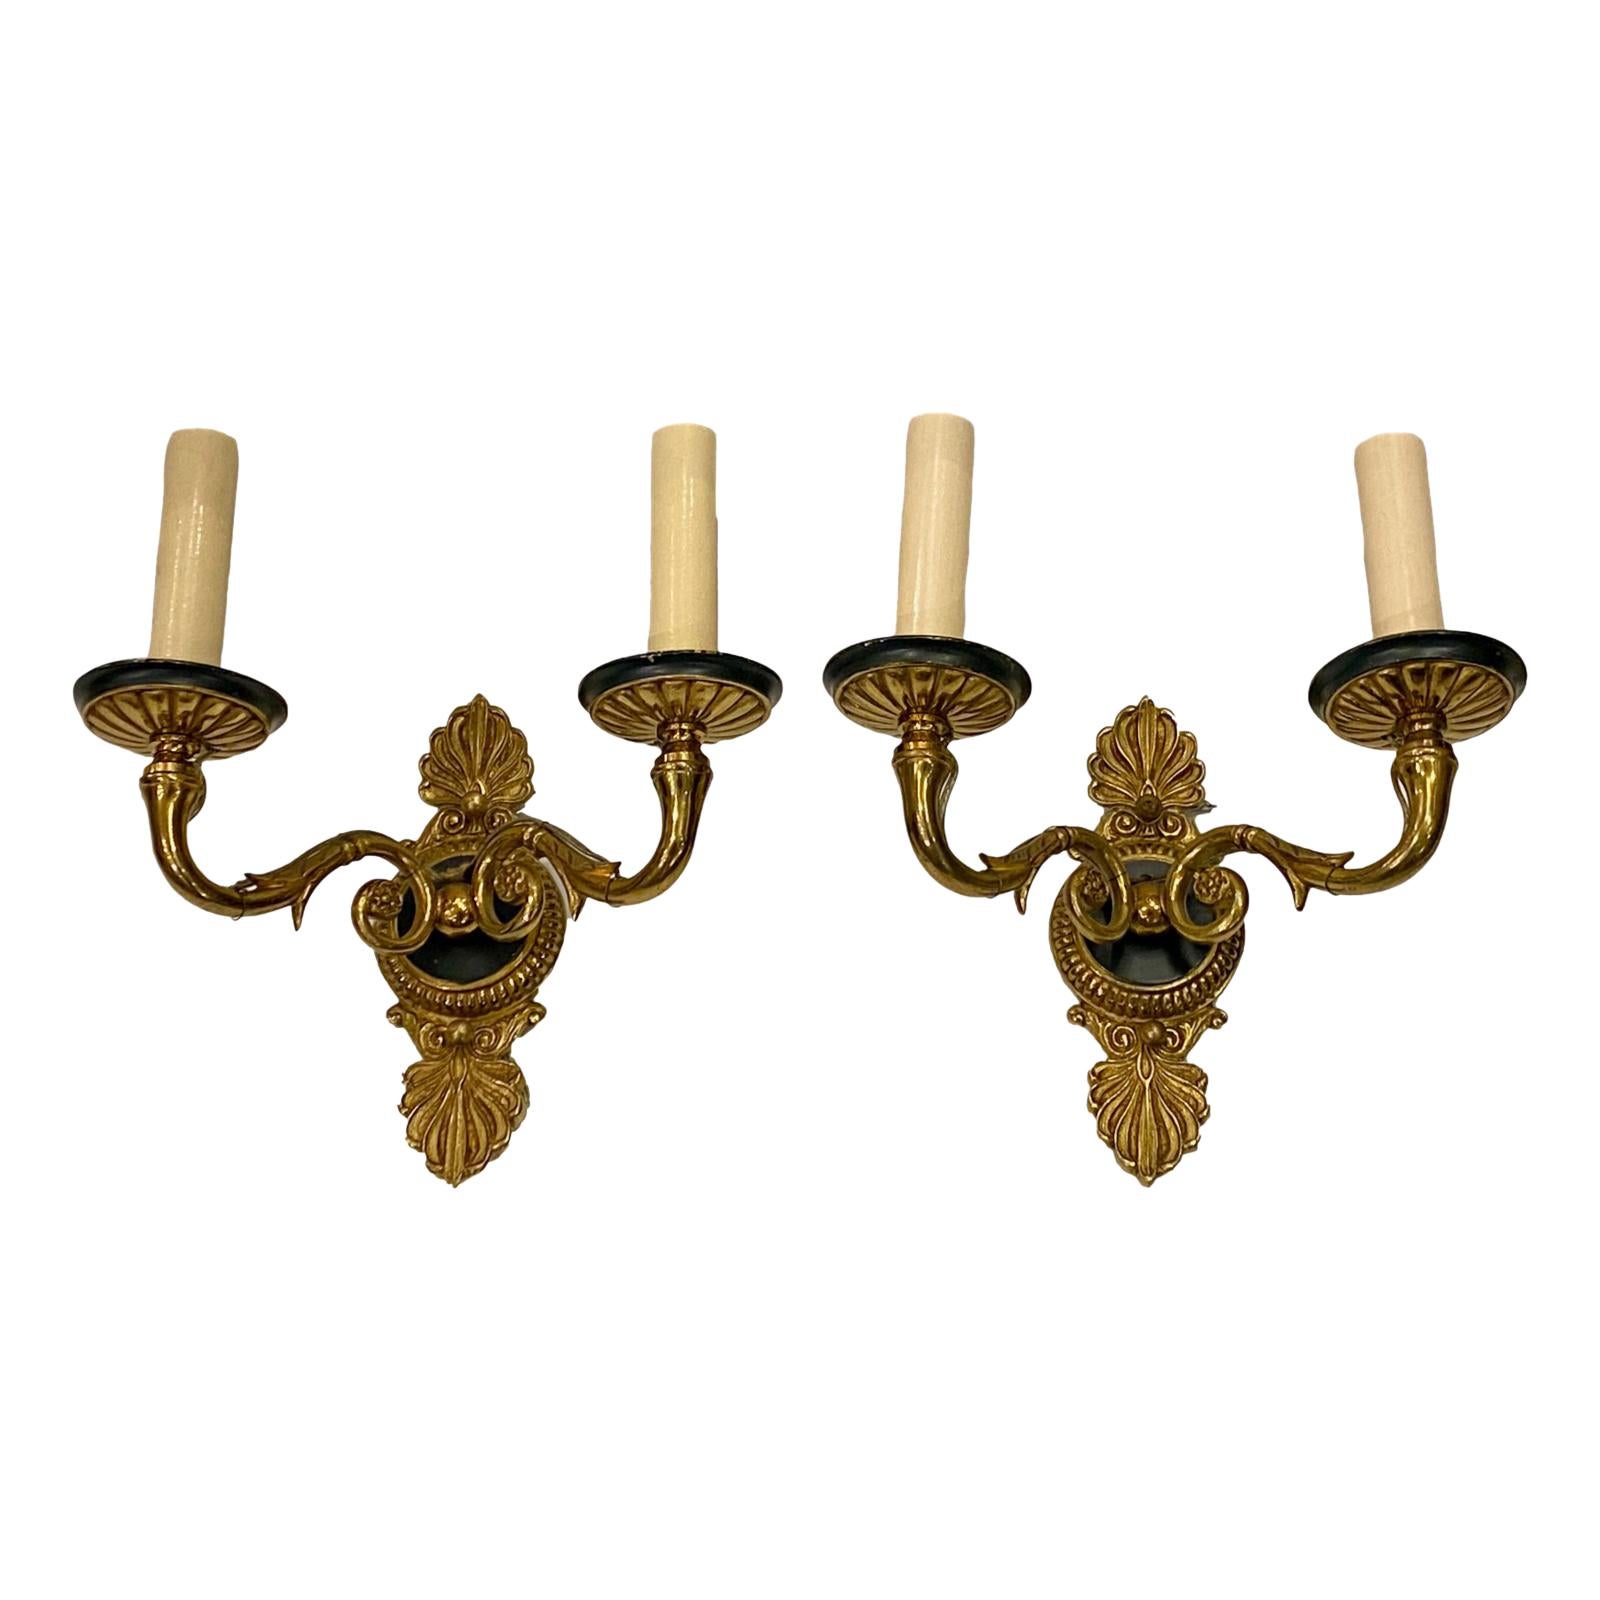 Pair of French Empire Style Sconces